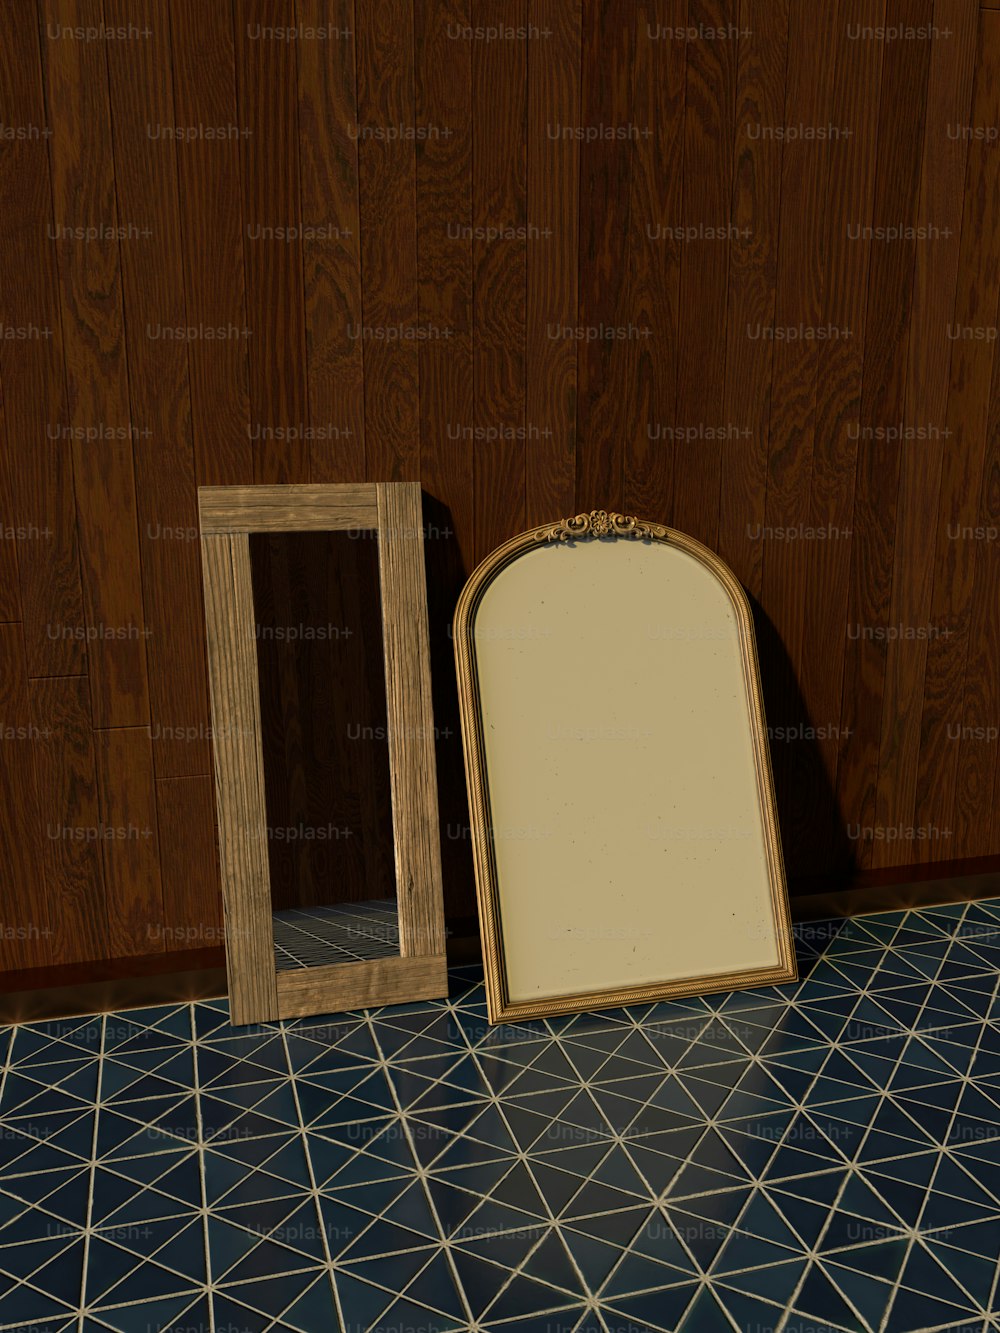 a mirror sitting on a tiled floor next to a wooden frame